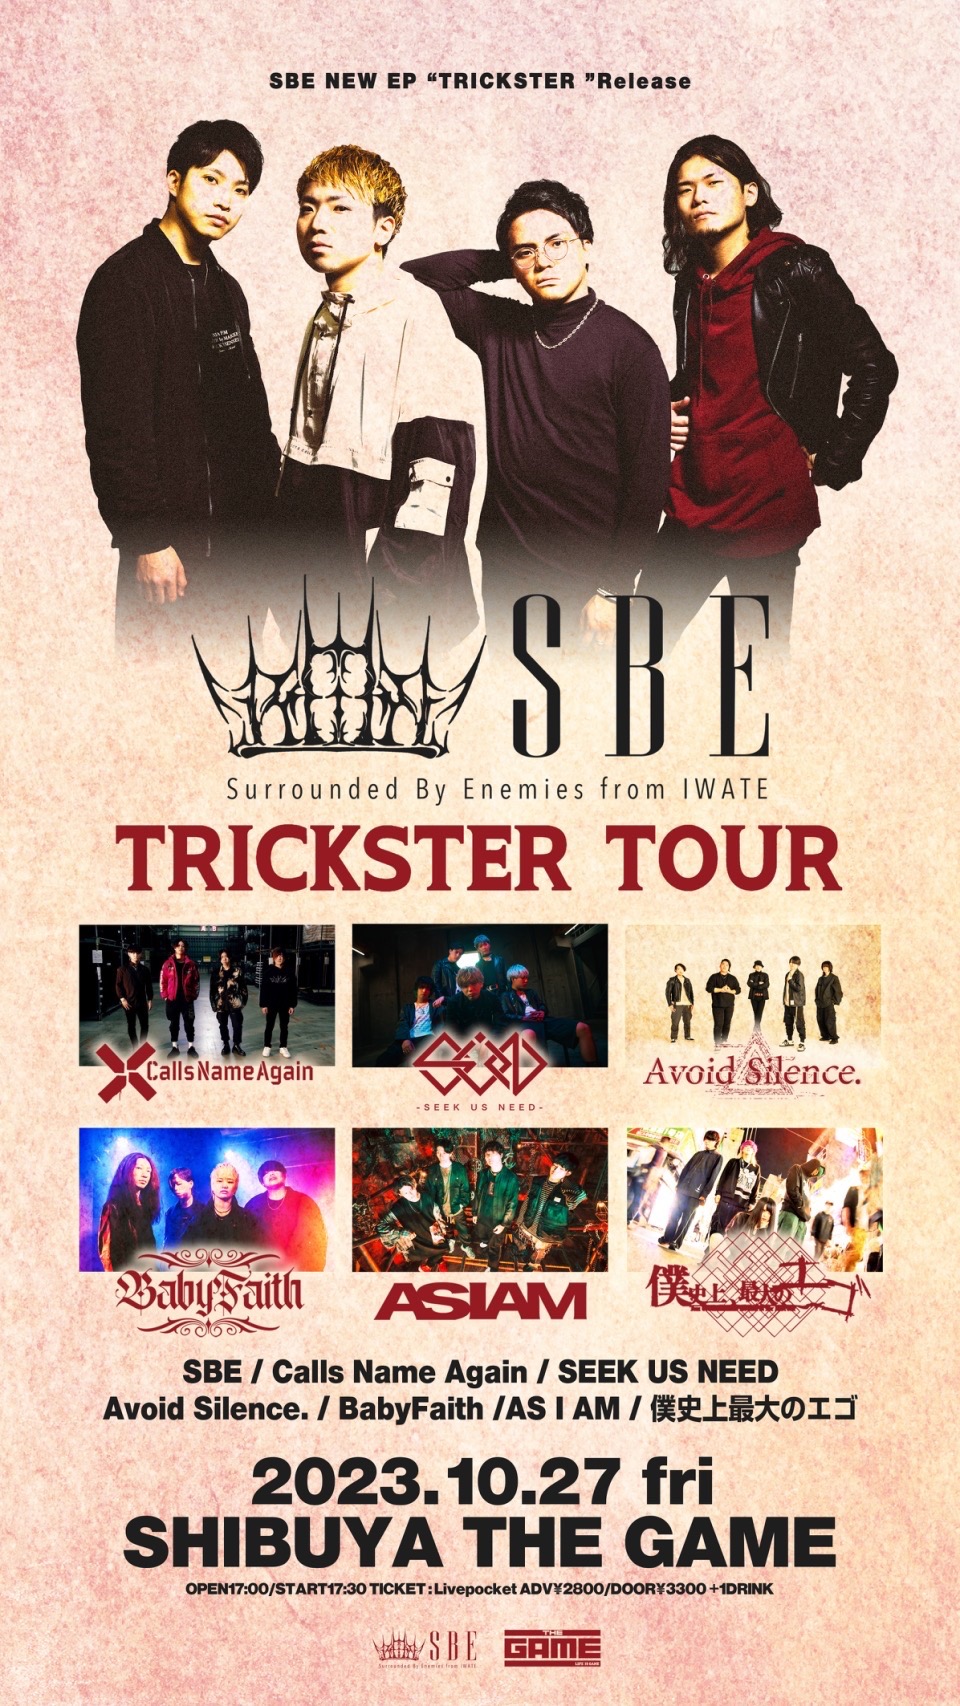 SBE NEW EP "TRICKSTER" Release Tour